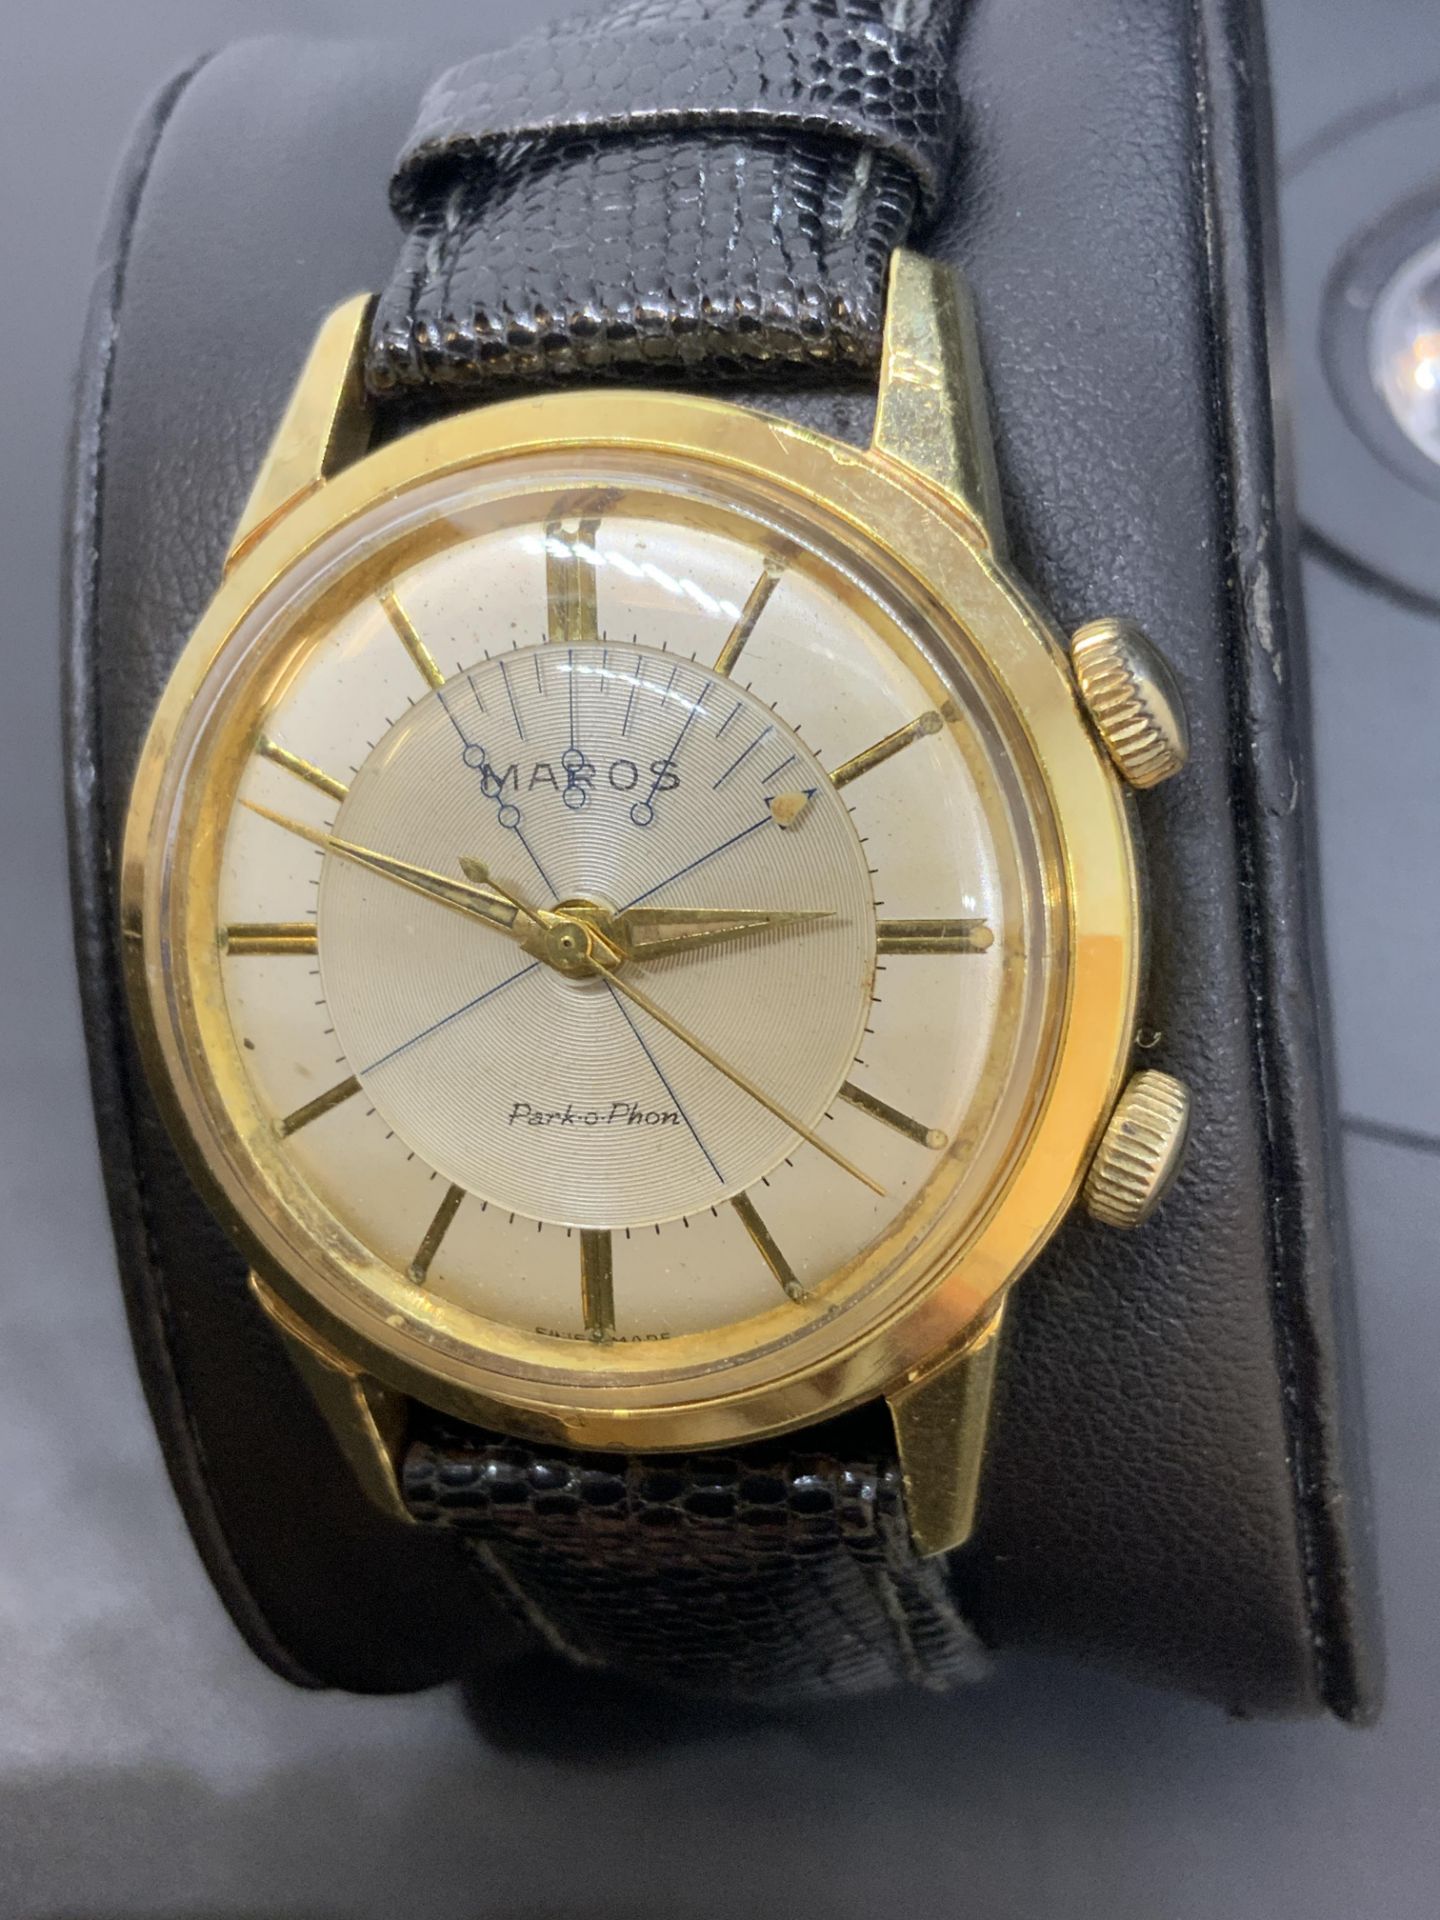 1960's MAROS PARK-O-PHON ALARM WATCH IN YELLOW METAL 35mm